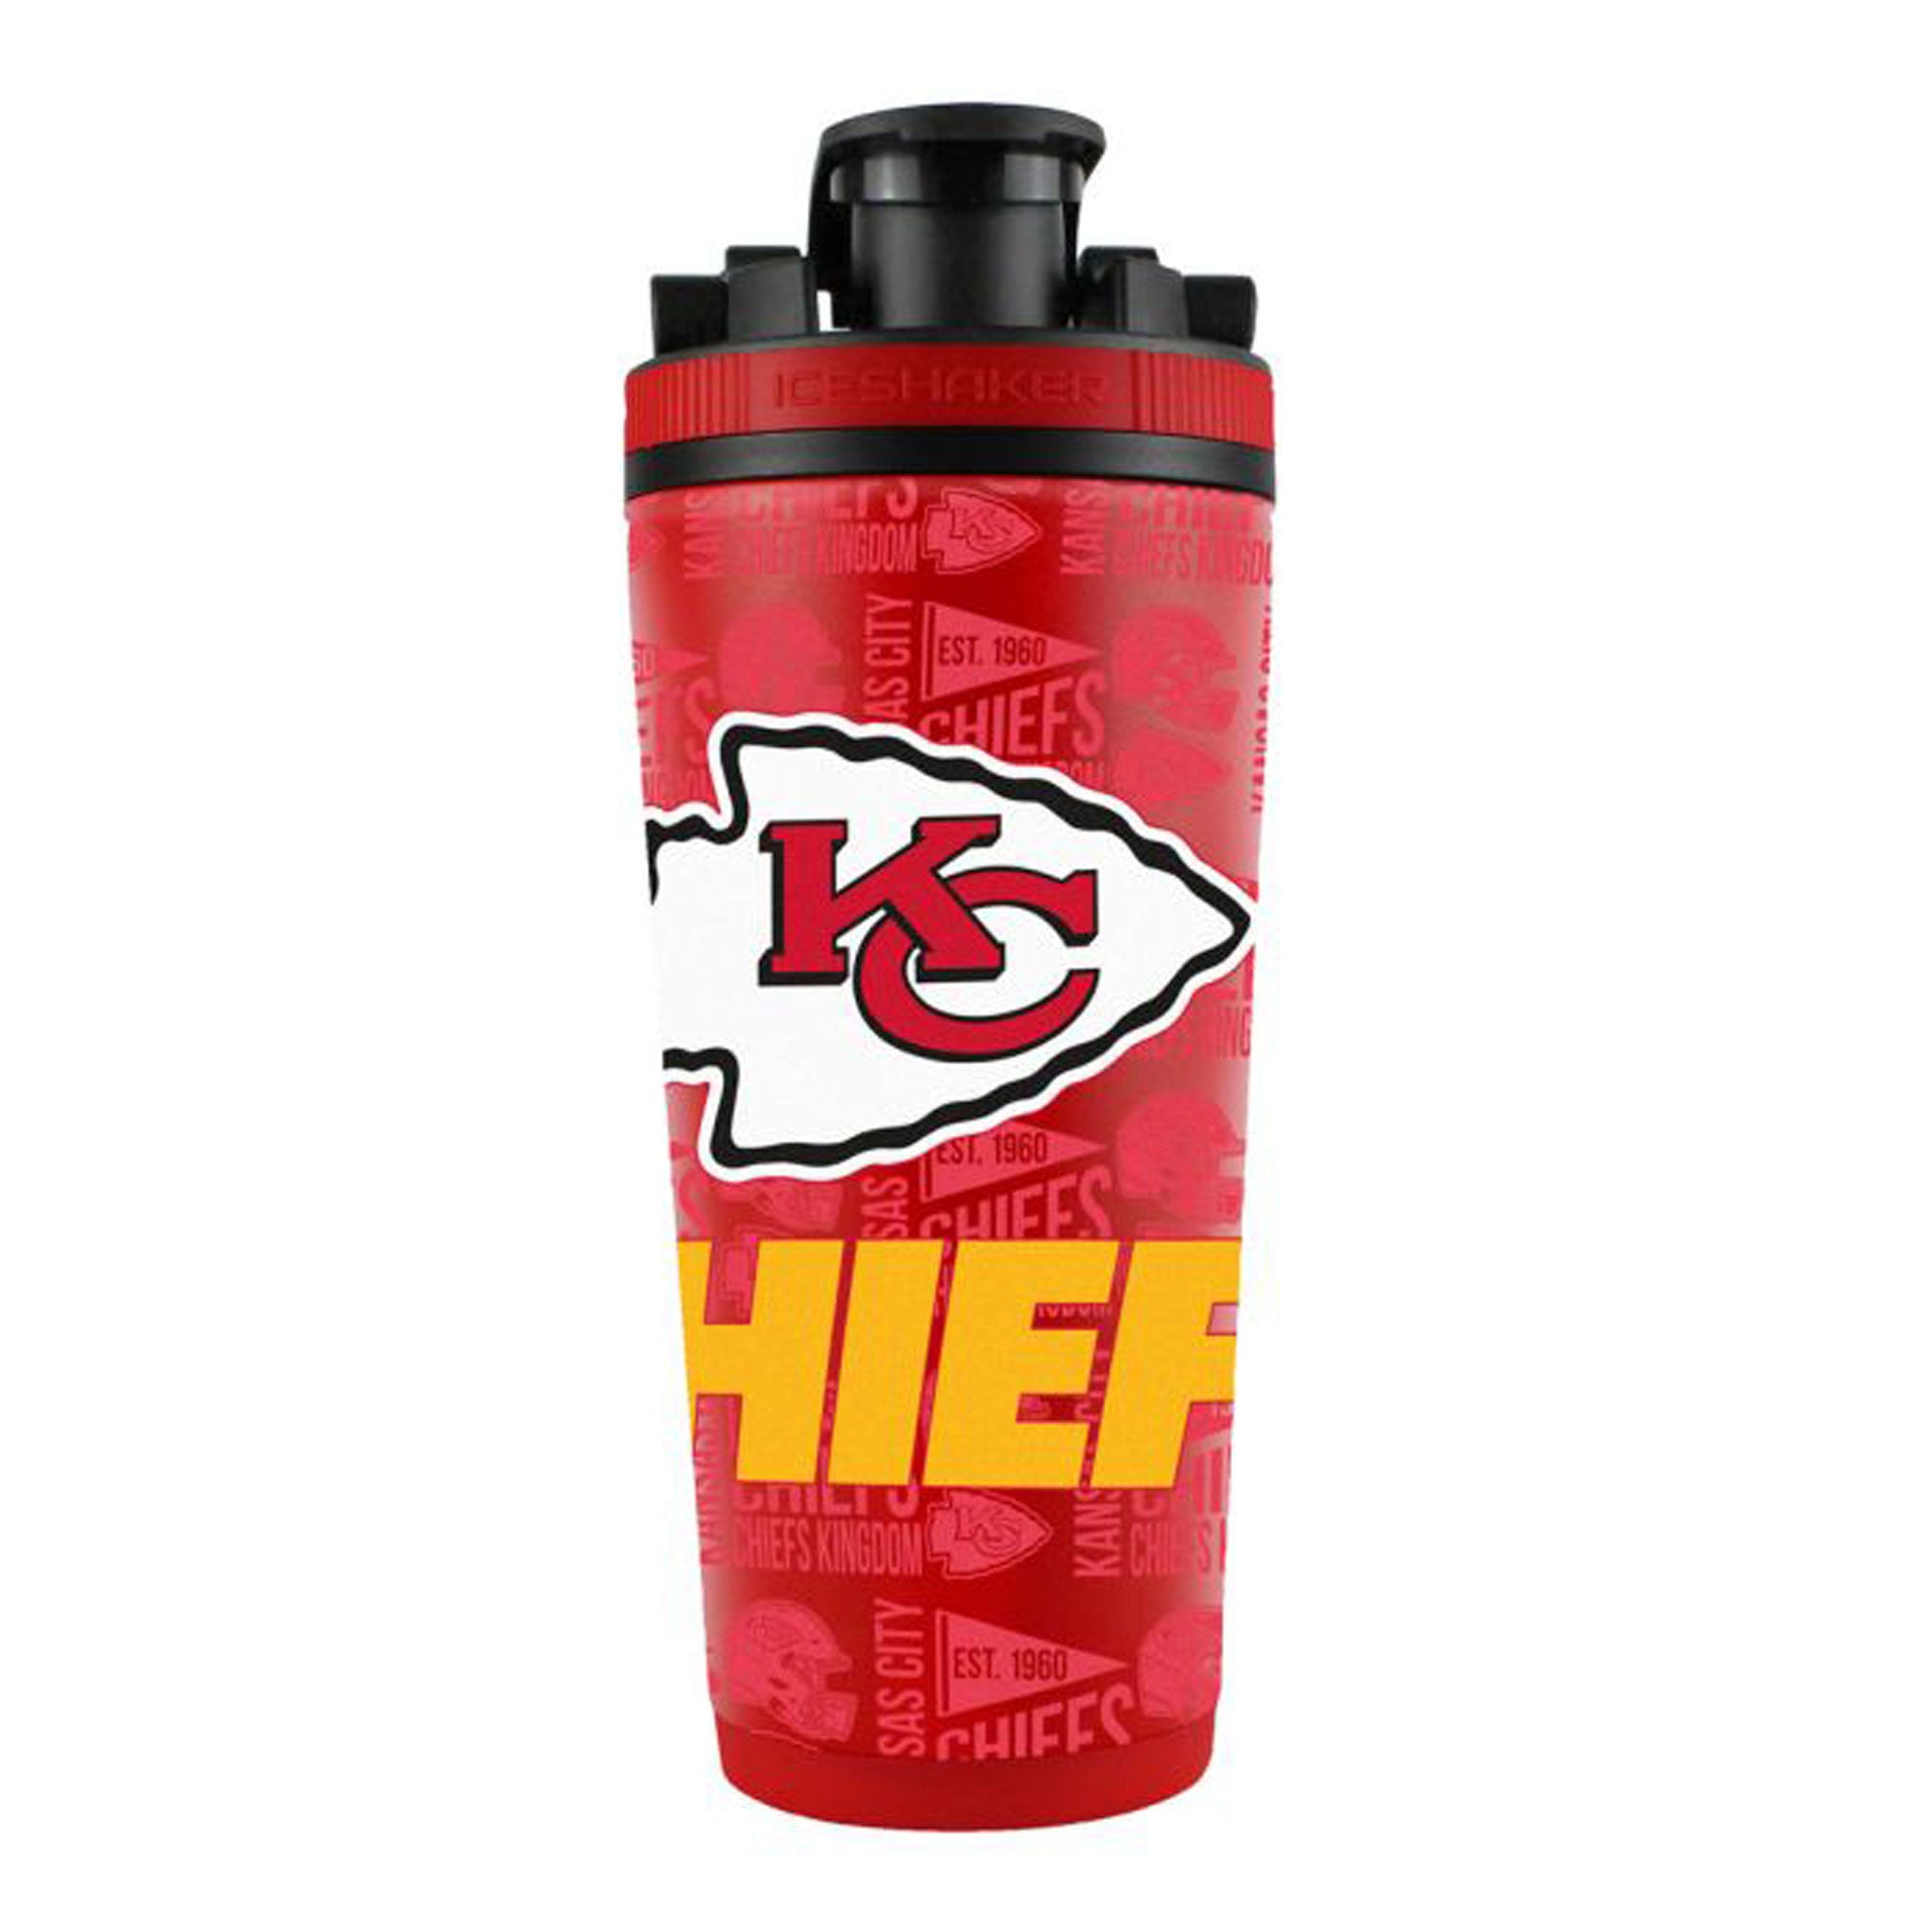 Officially Licensed Kansas City Chiefs 4D Ice Shaker